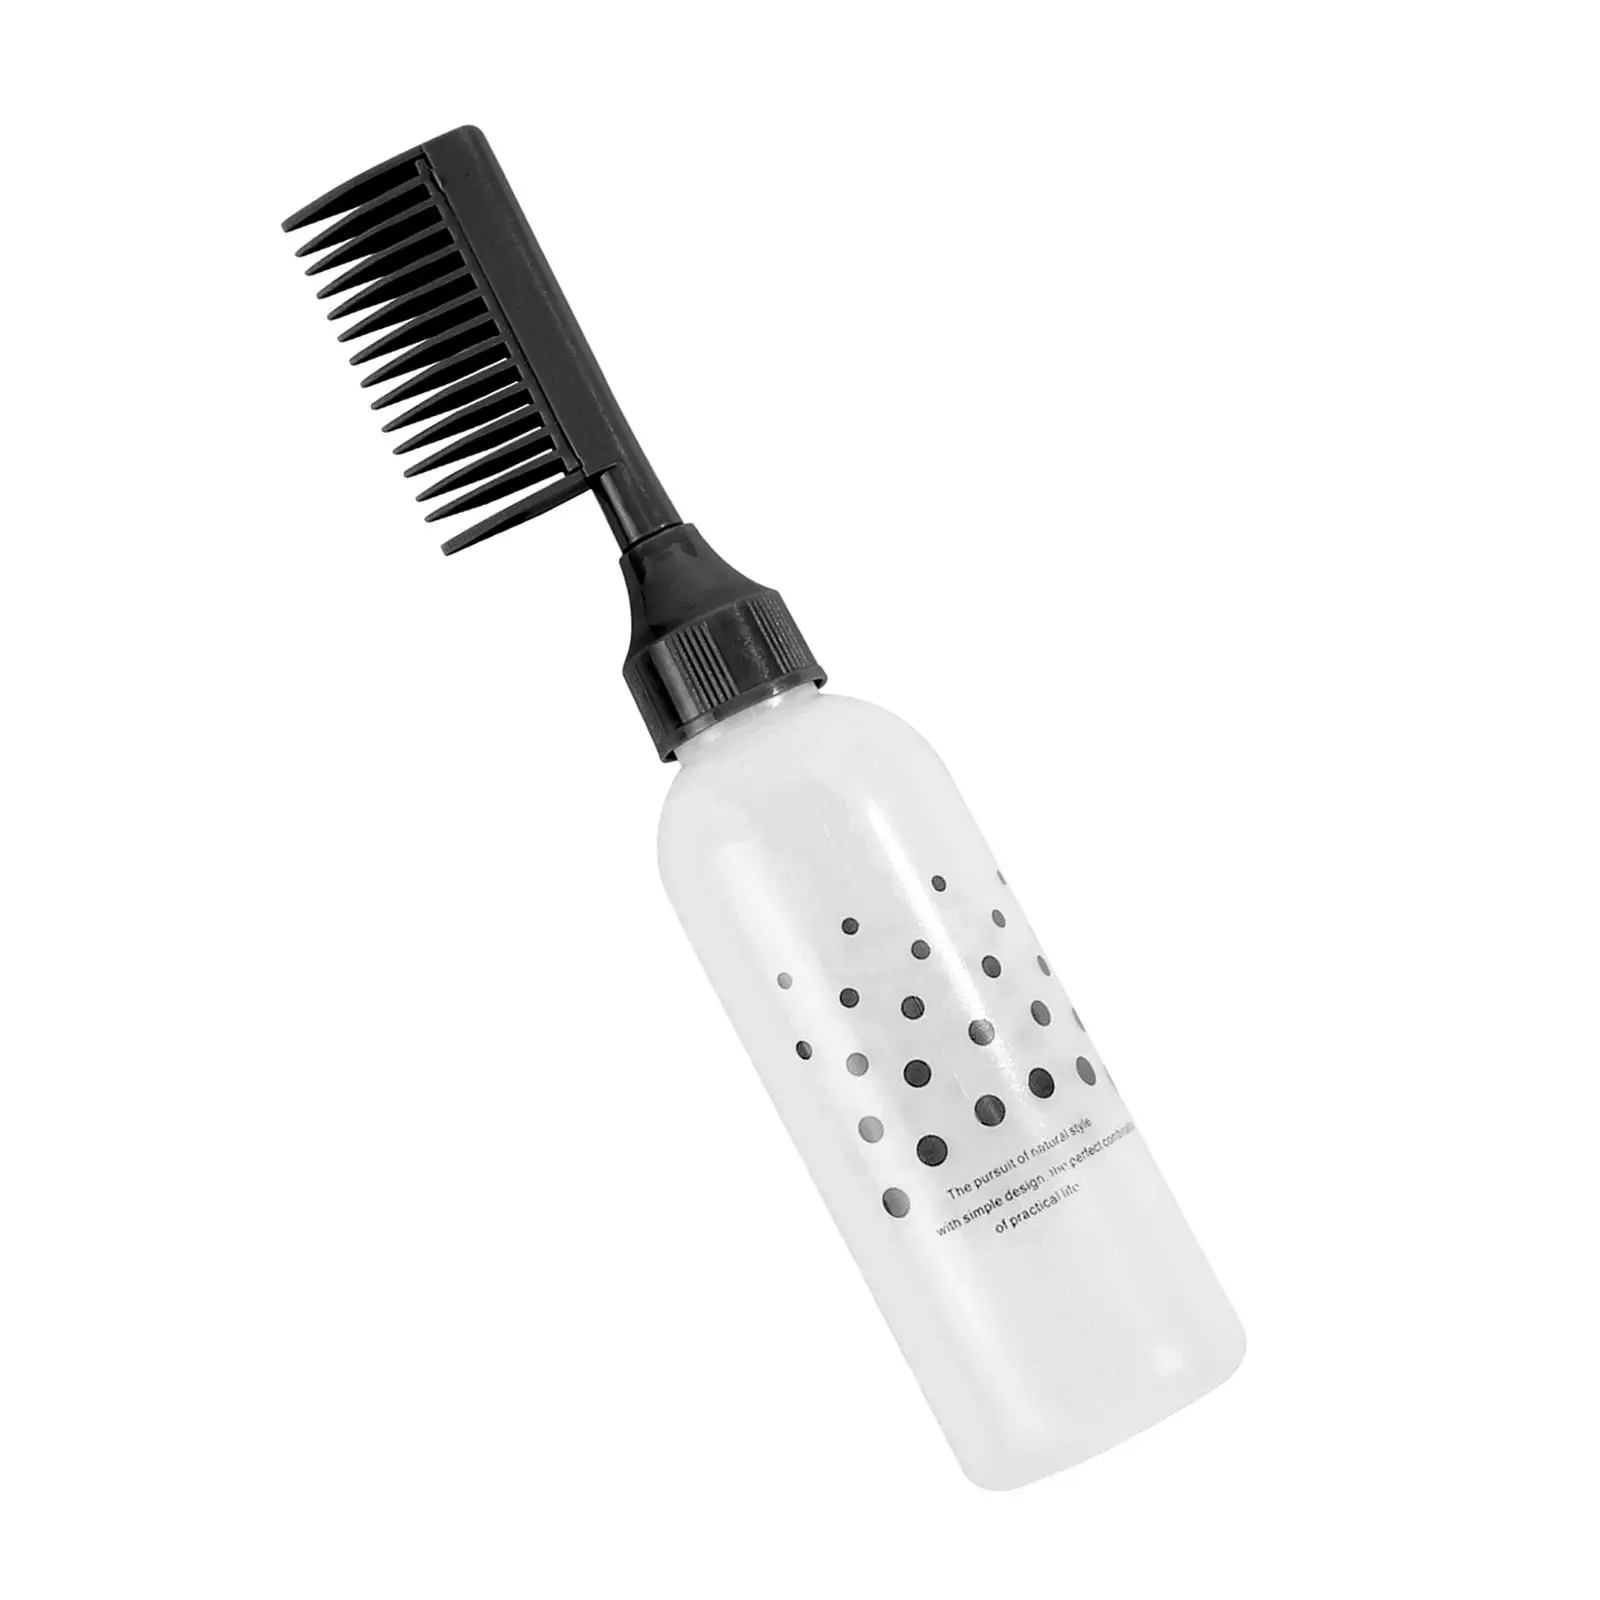 root comb Bottle Hair Dye Applicator Brush Hair Styling Tool Hair Coloring Dyeing Bottle Accessory for Salon Shop